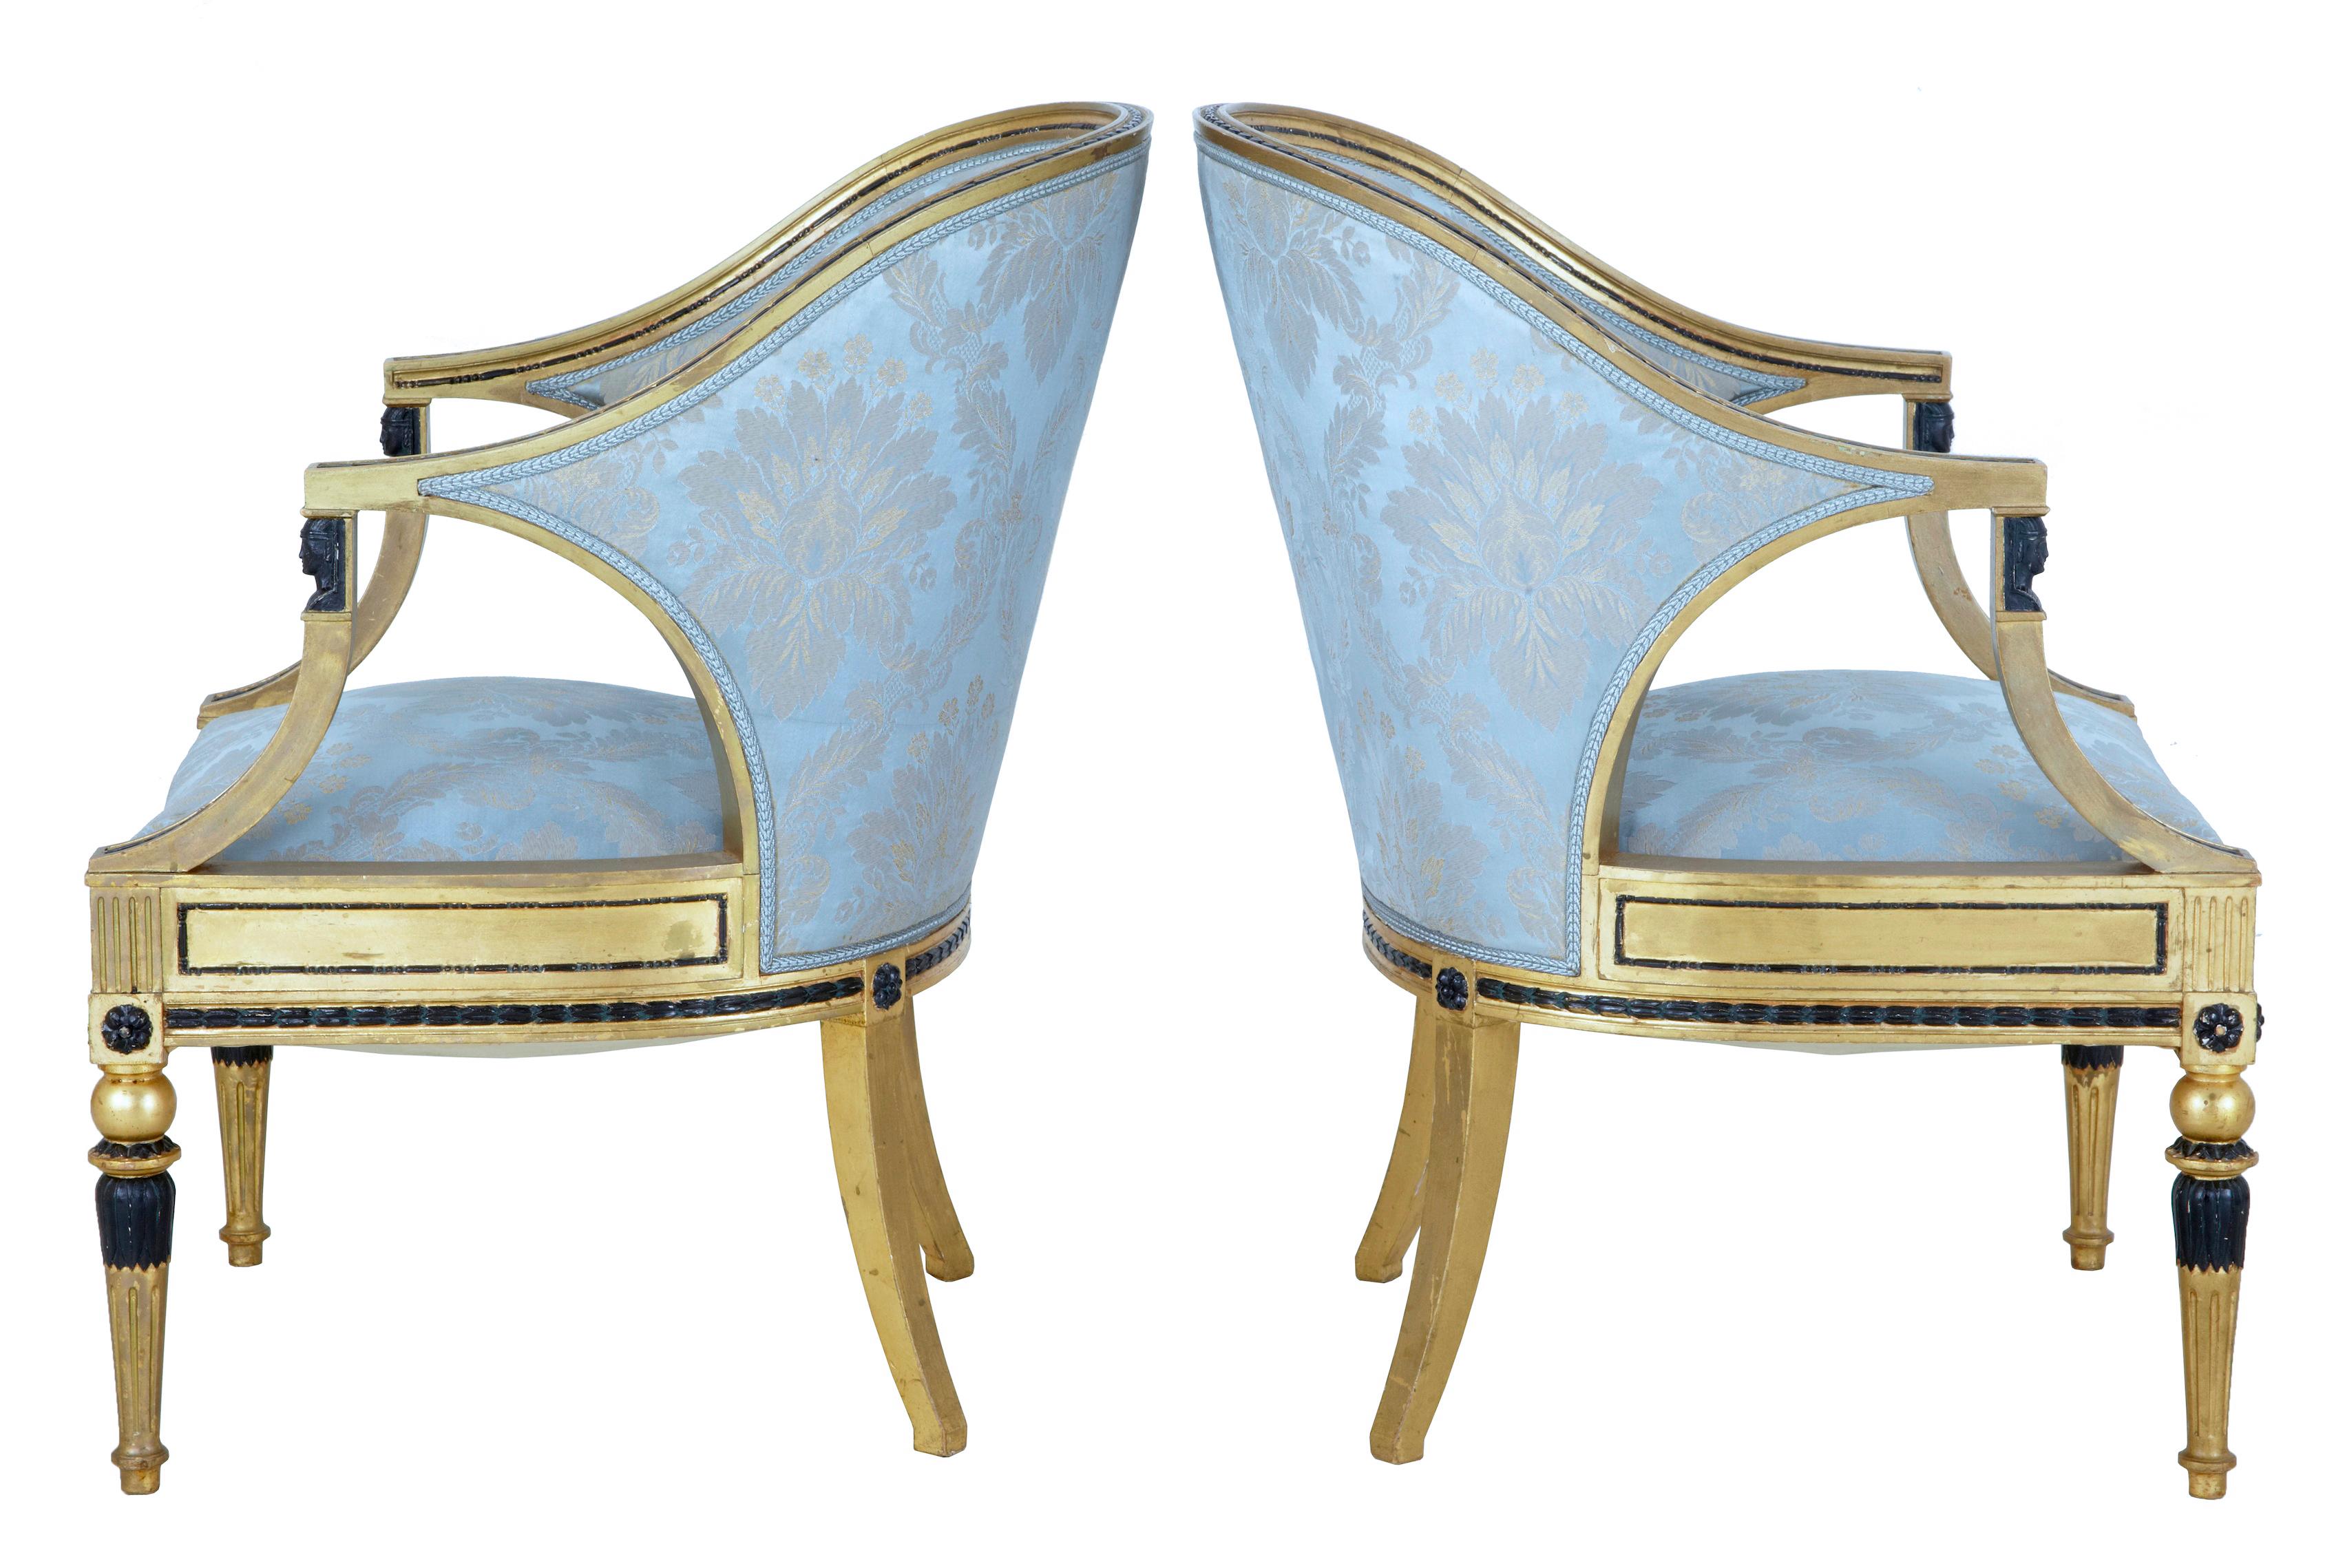 Pair of 19th century gothenburg gilt armchairs circa 1870.

Fine quality pair of Swedish gothenburg gilt armchairs circa 1870. Slipper like shaped backs, the shaped arms supported by ebonized egyptian influenced mounts. Ebonized leaves flow down